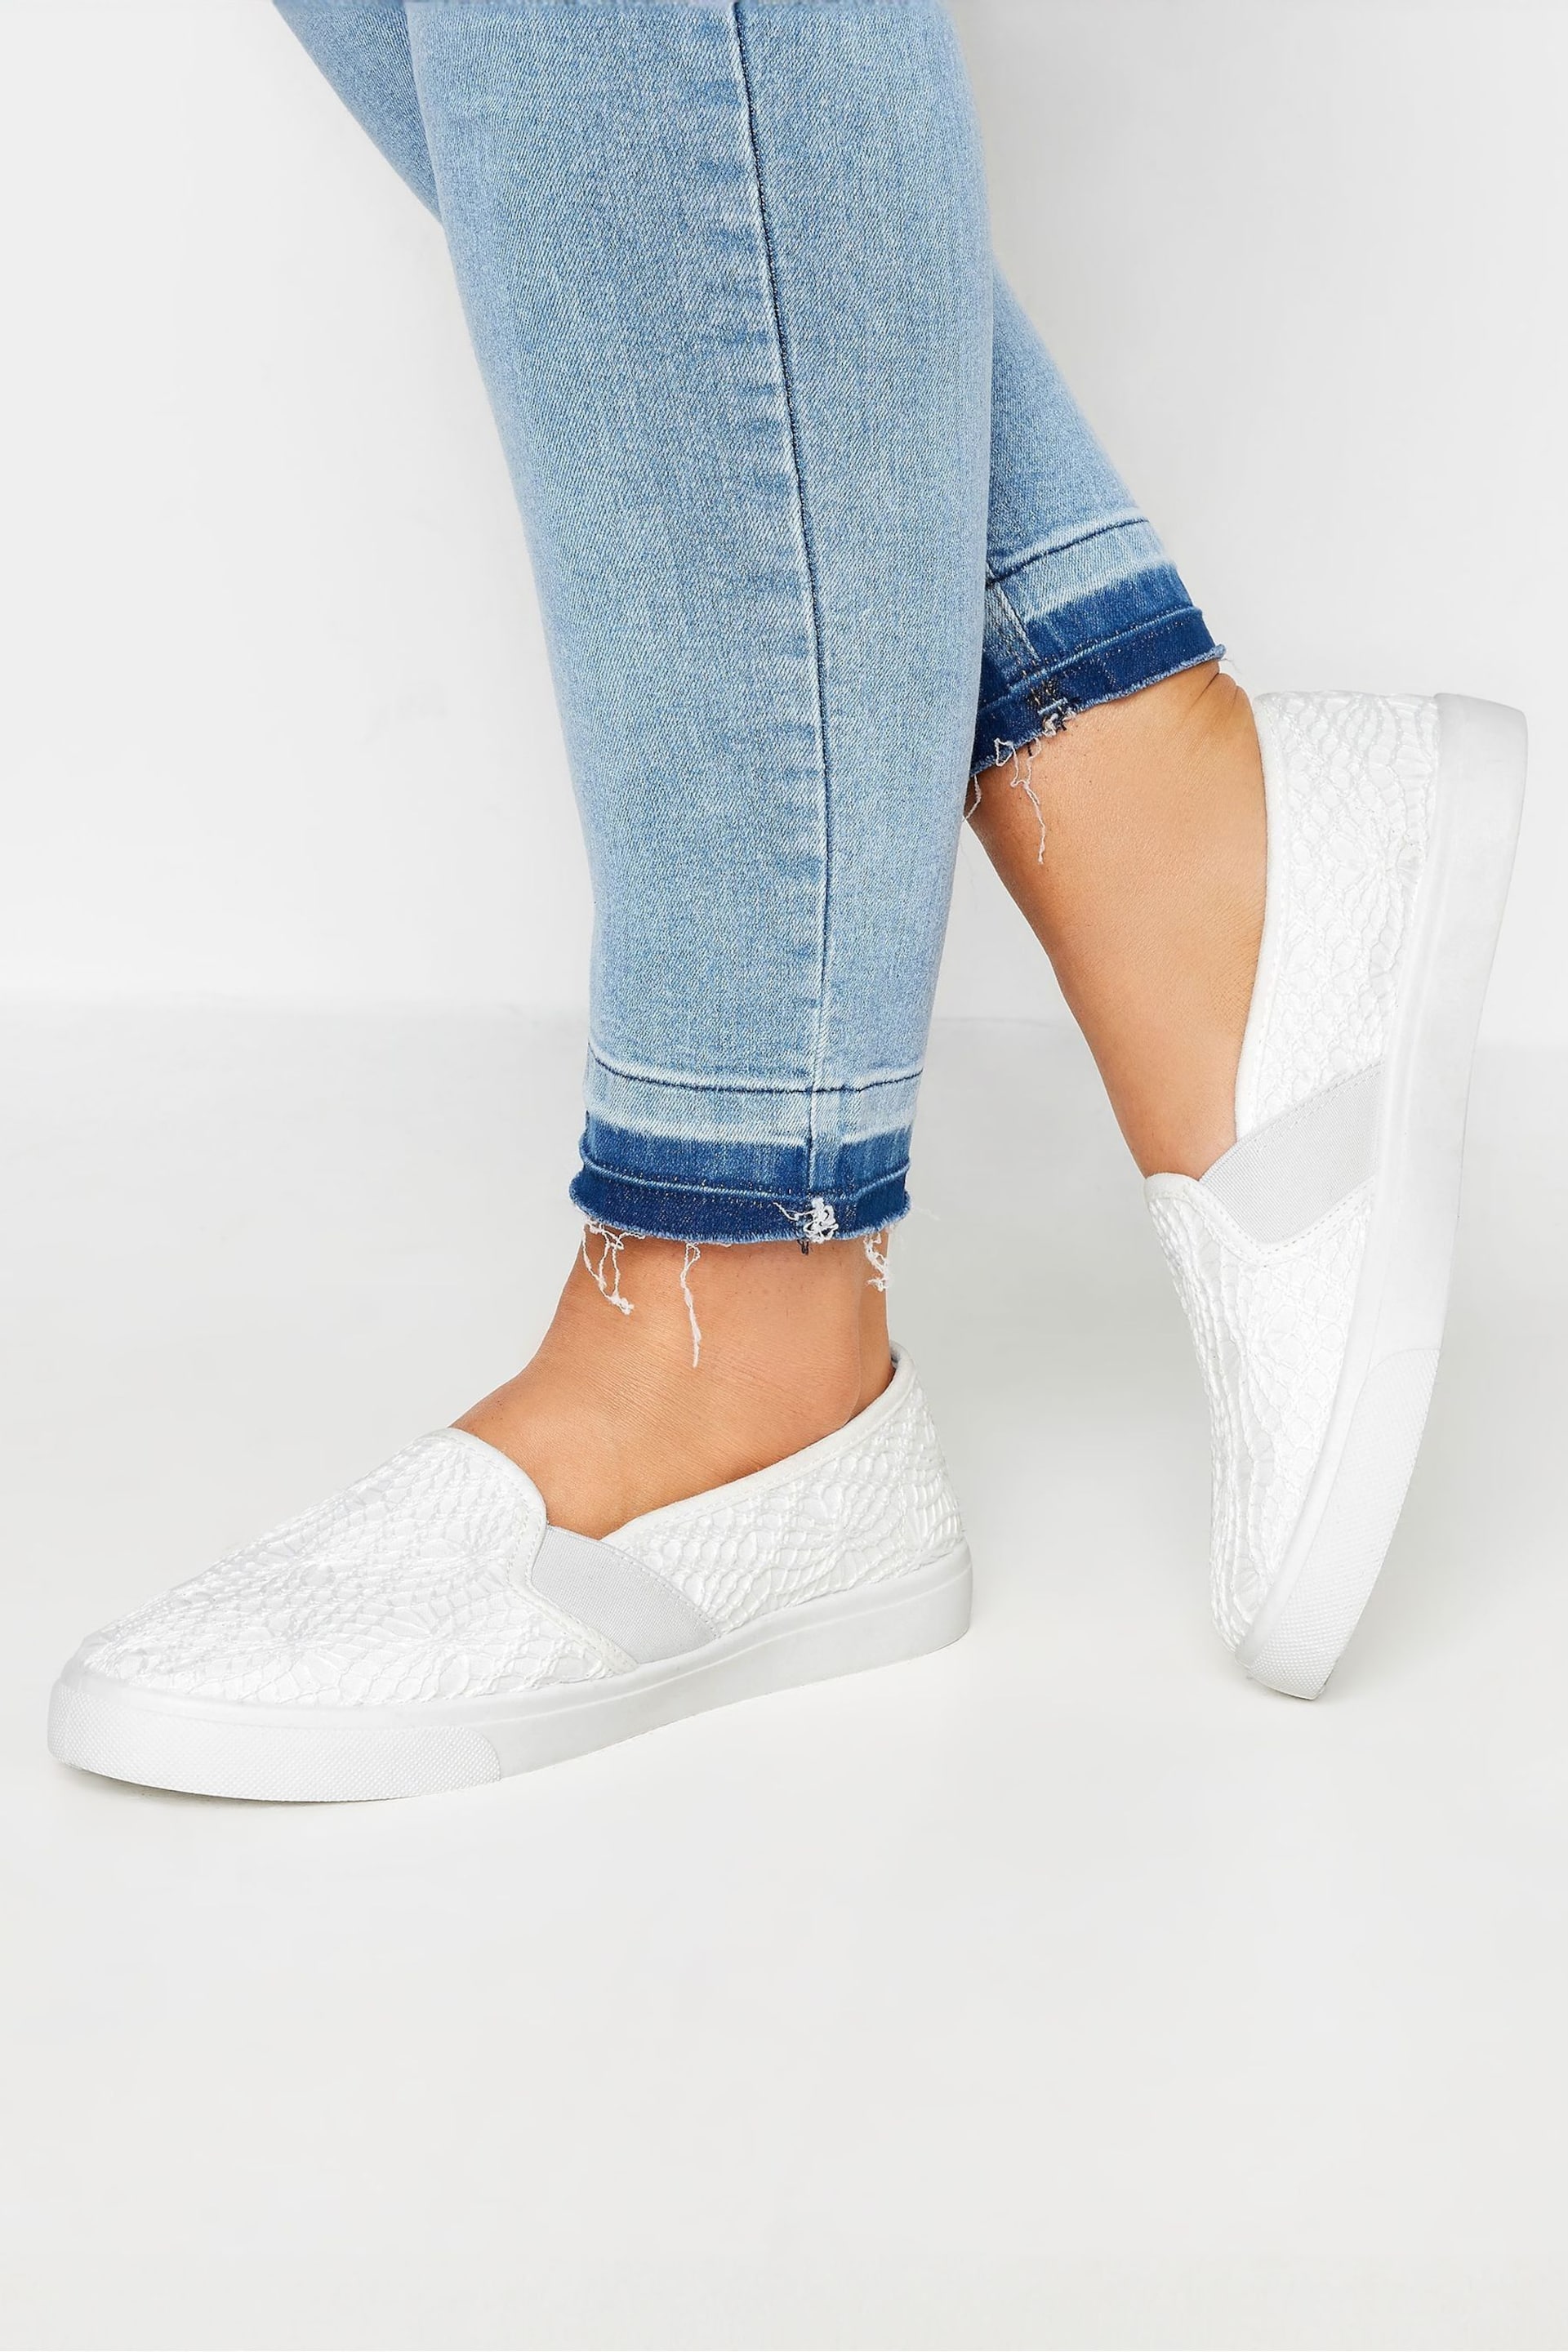 Yours Curve White Broderie Anglaise Slip-On Trainers In Wide E Fit - Image 5 of 5